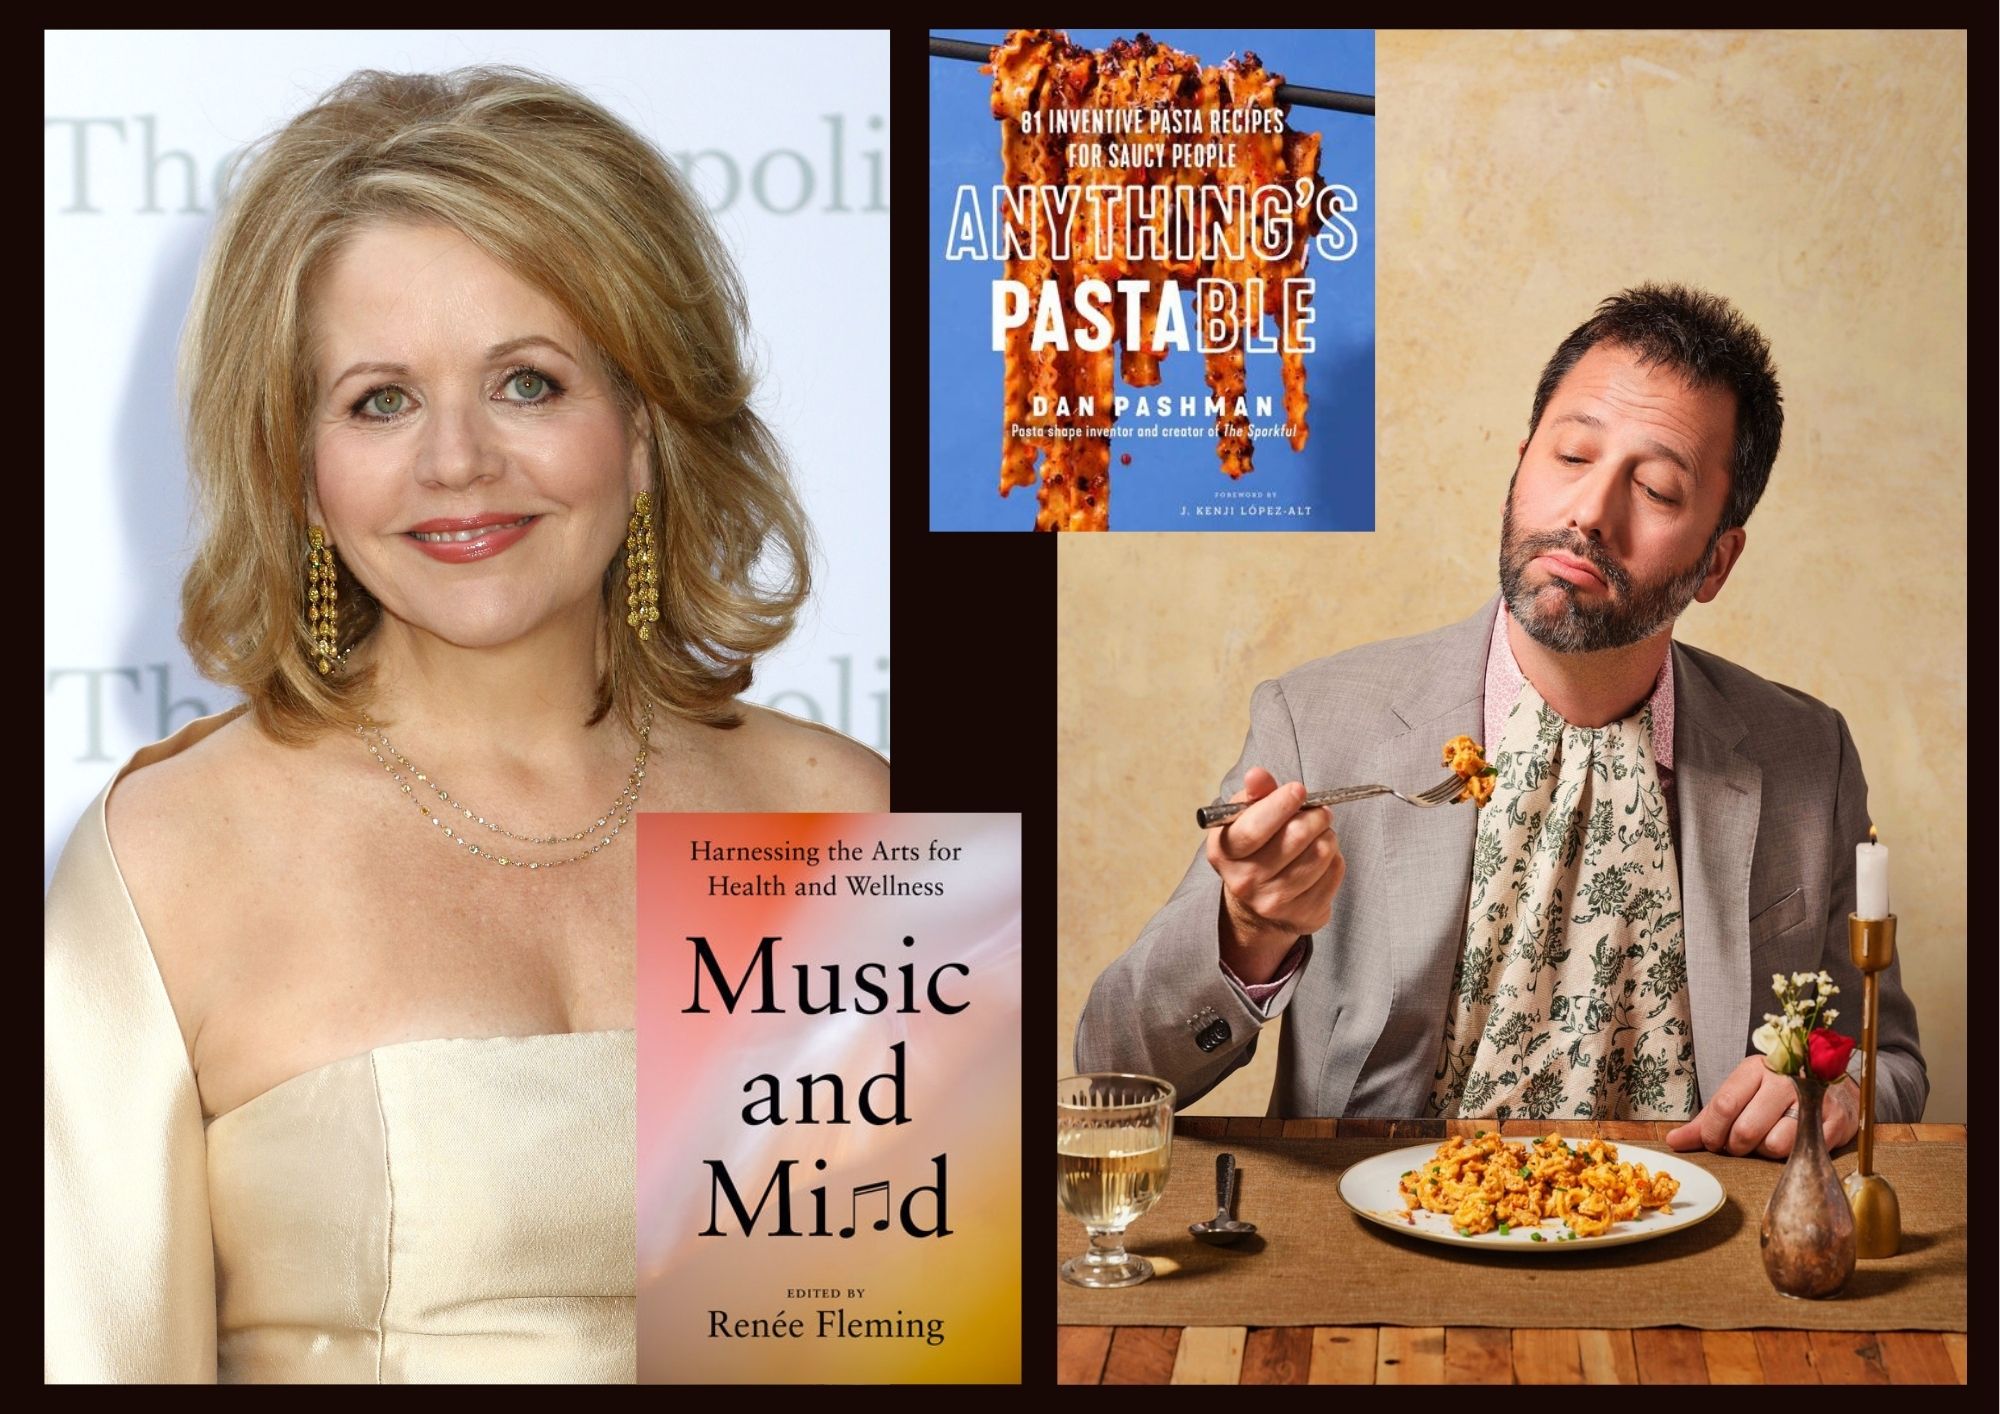 Renée Fleming Discusses the Intersection of Arts and Health, Dan Pashman Explores ‘Anything’s Pastable’